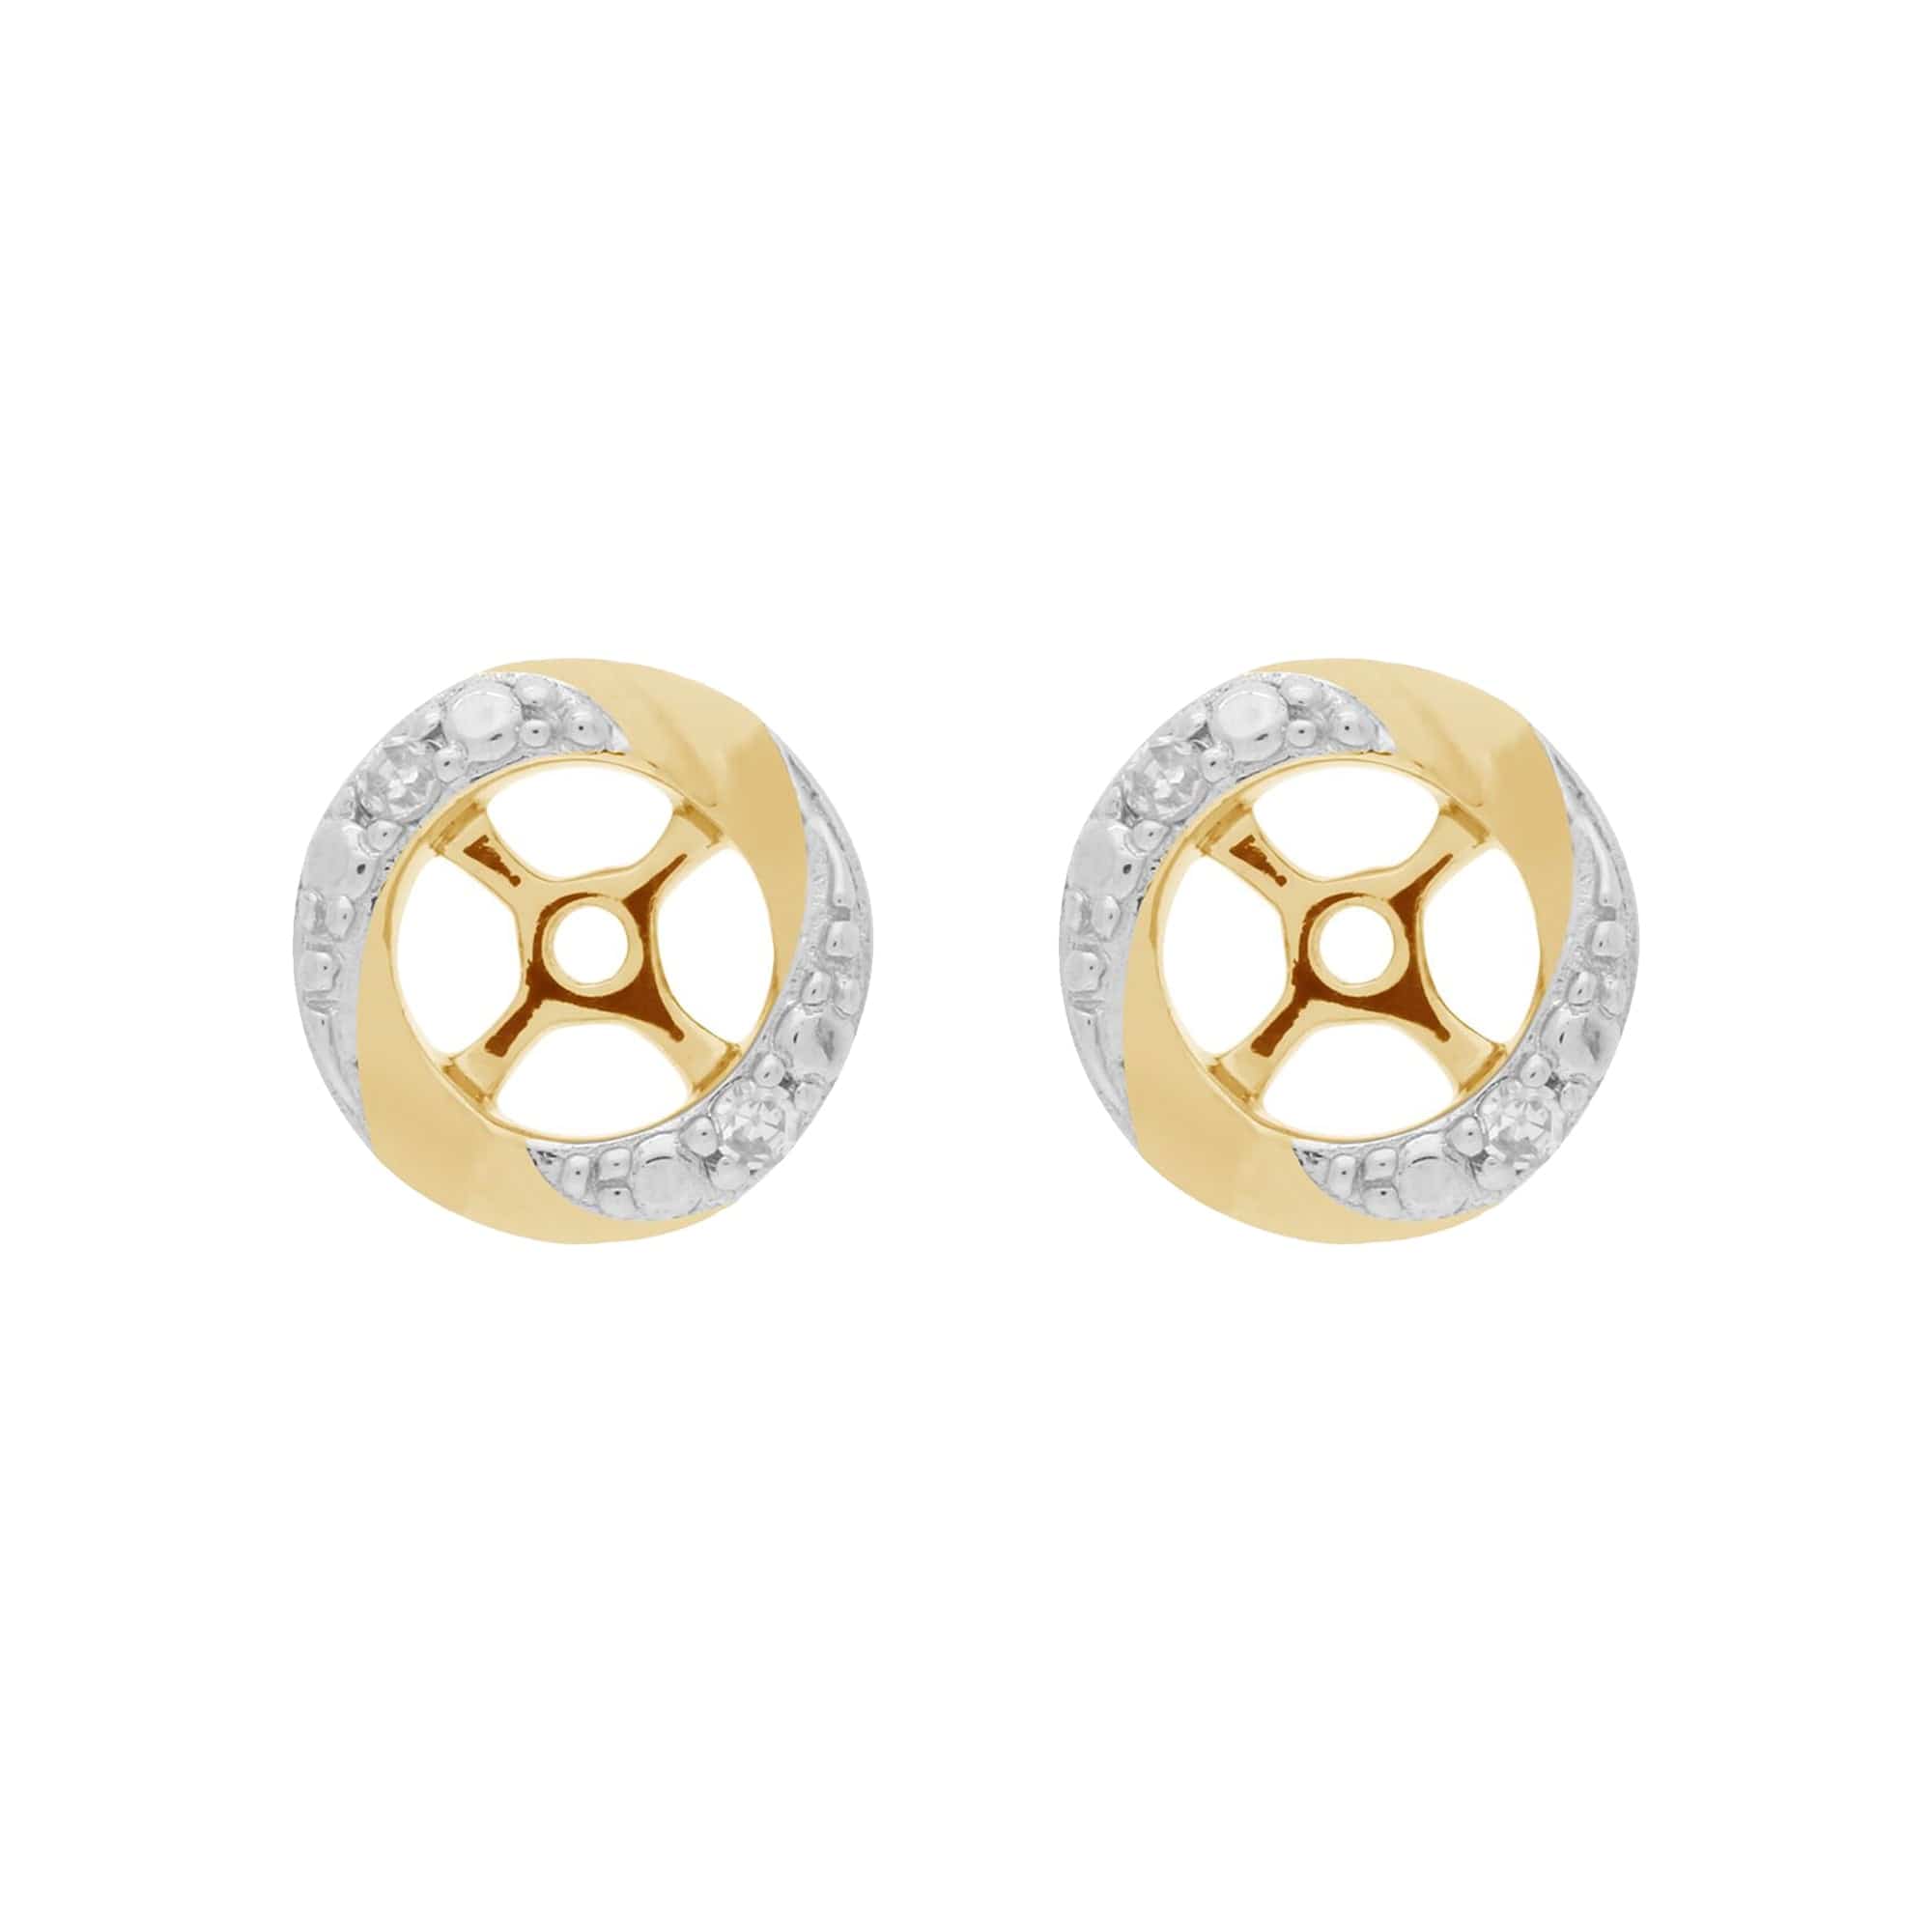 Classic Round Fire Opal Stud Earrings with Detachable Diamond Halo Ear Jacket in 9ct Yellow Gold - Gemondo